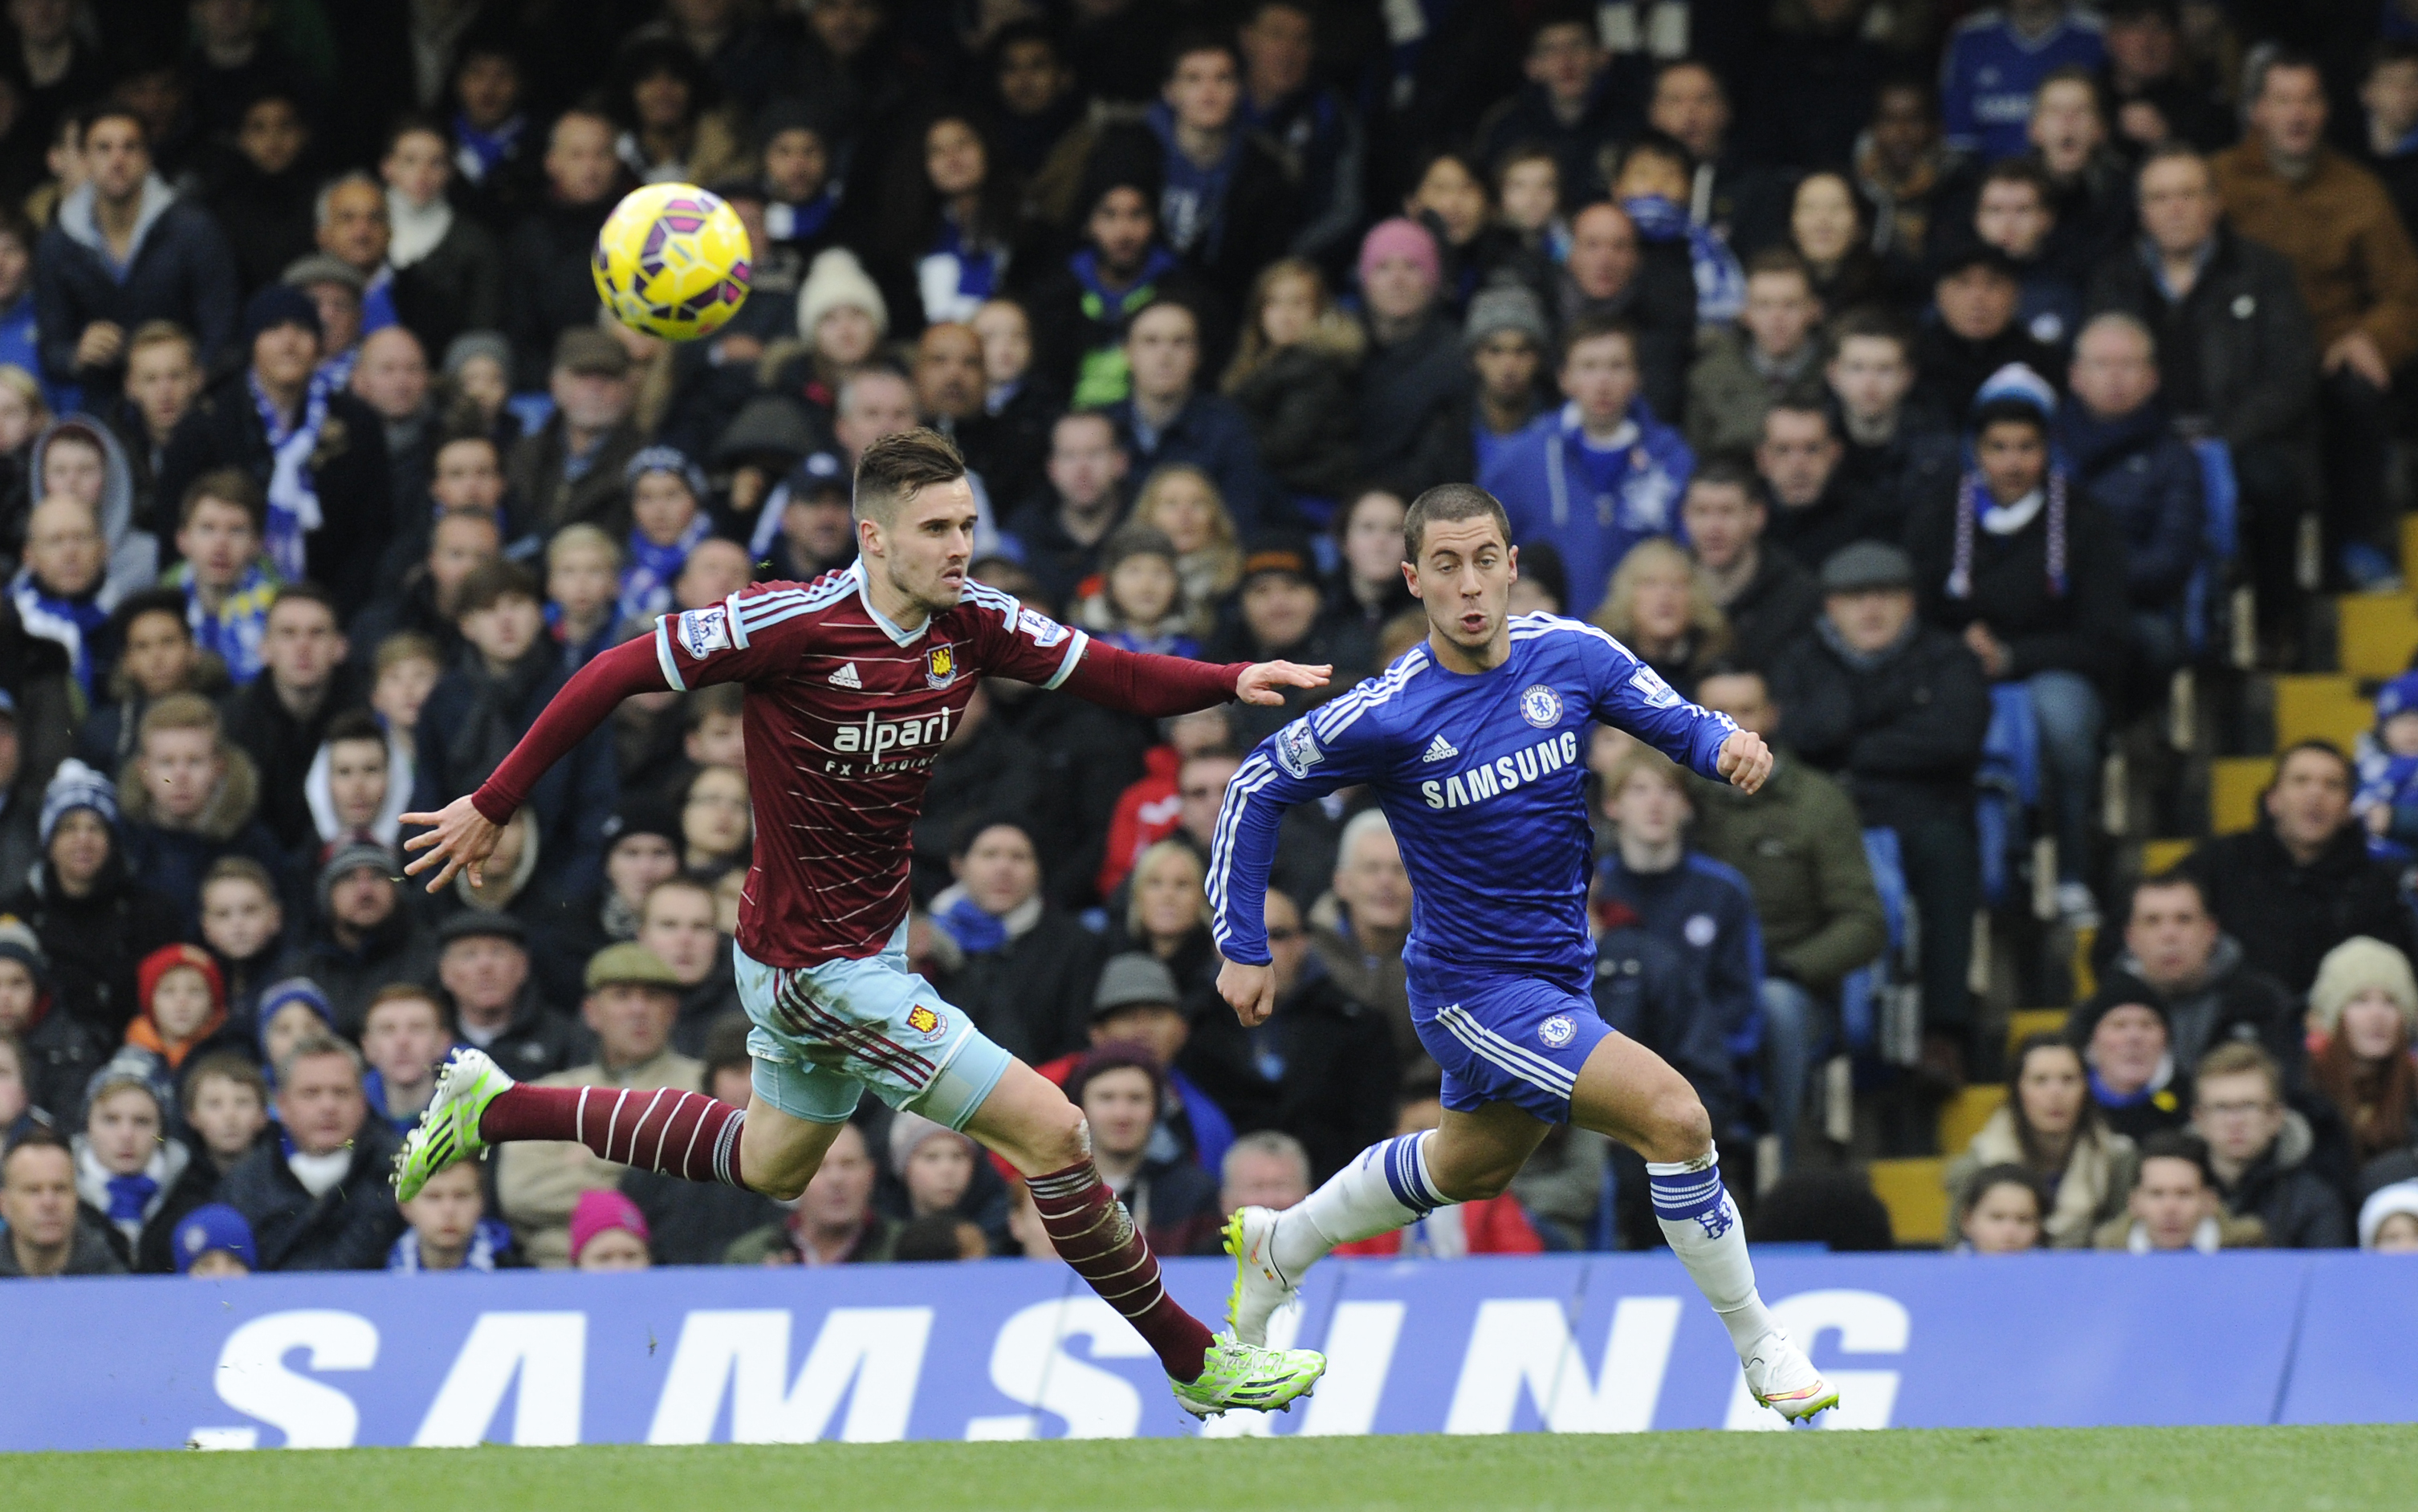 epa04540501 Chelsea Eden Hazard (R) vies for the ball against West Ham Carl Jenkinson (L) during their English Premier League soccer match between Chelsea and West Ham United at Stamford Bridge in London, Britain, 26 December 2014.  EPA/FACUNDO ARRIZABALAGA DataCo terms and conditions apply. http://www.epa.eu/files/Terms%20and%20Conditions/DataCo_Terms_and_Conditions.pdf